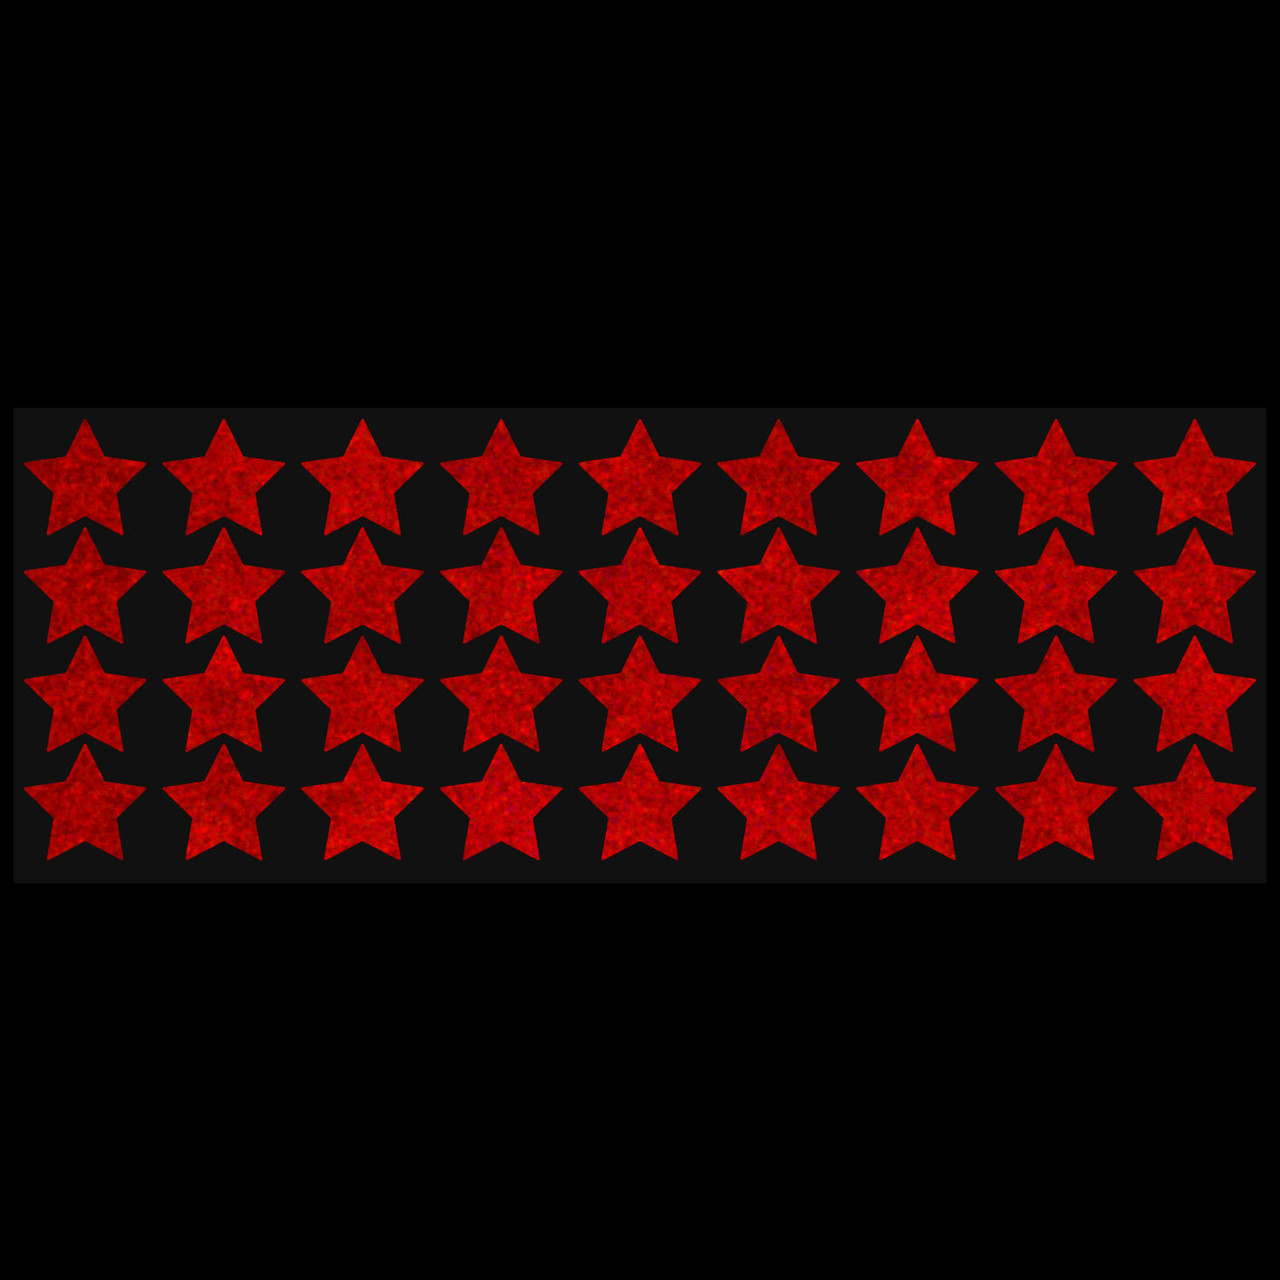 Red-Reflective Star Decal/Sticker